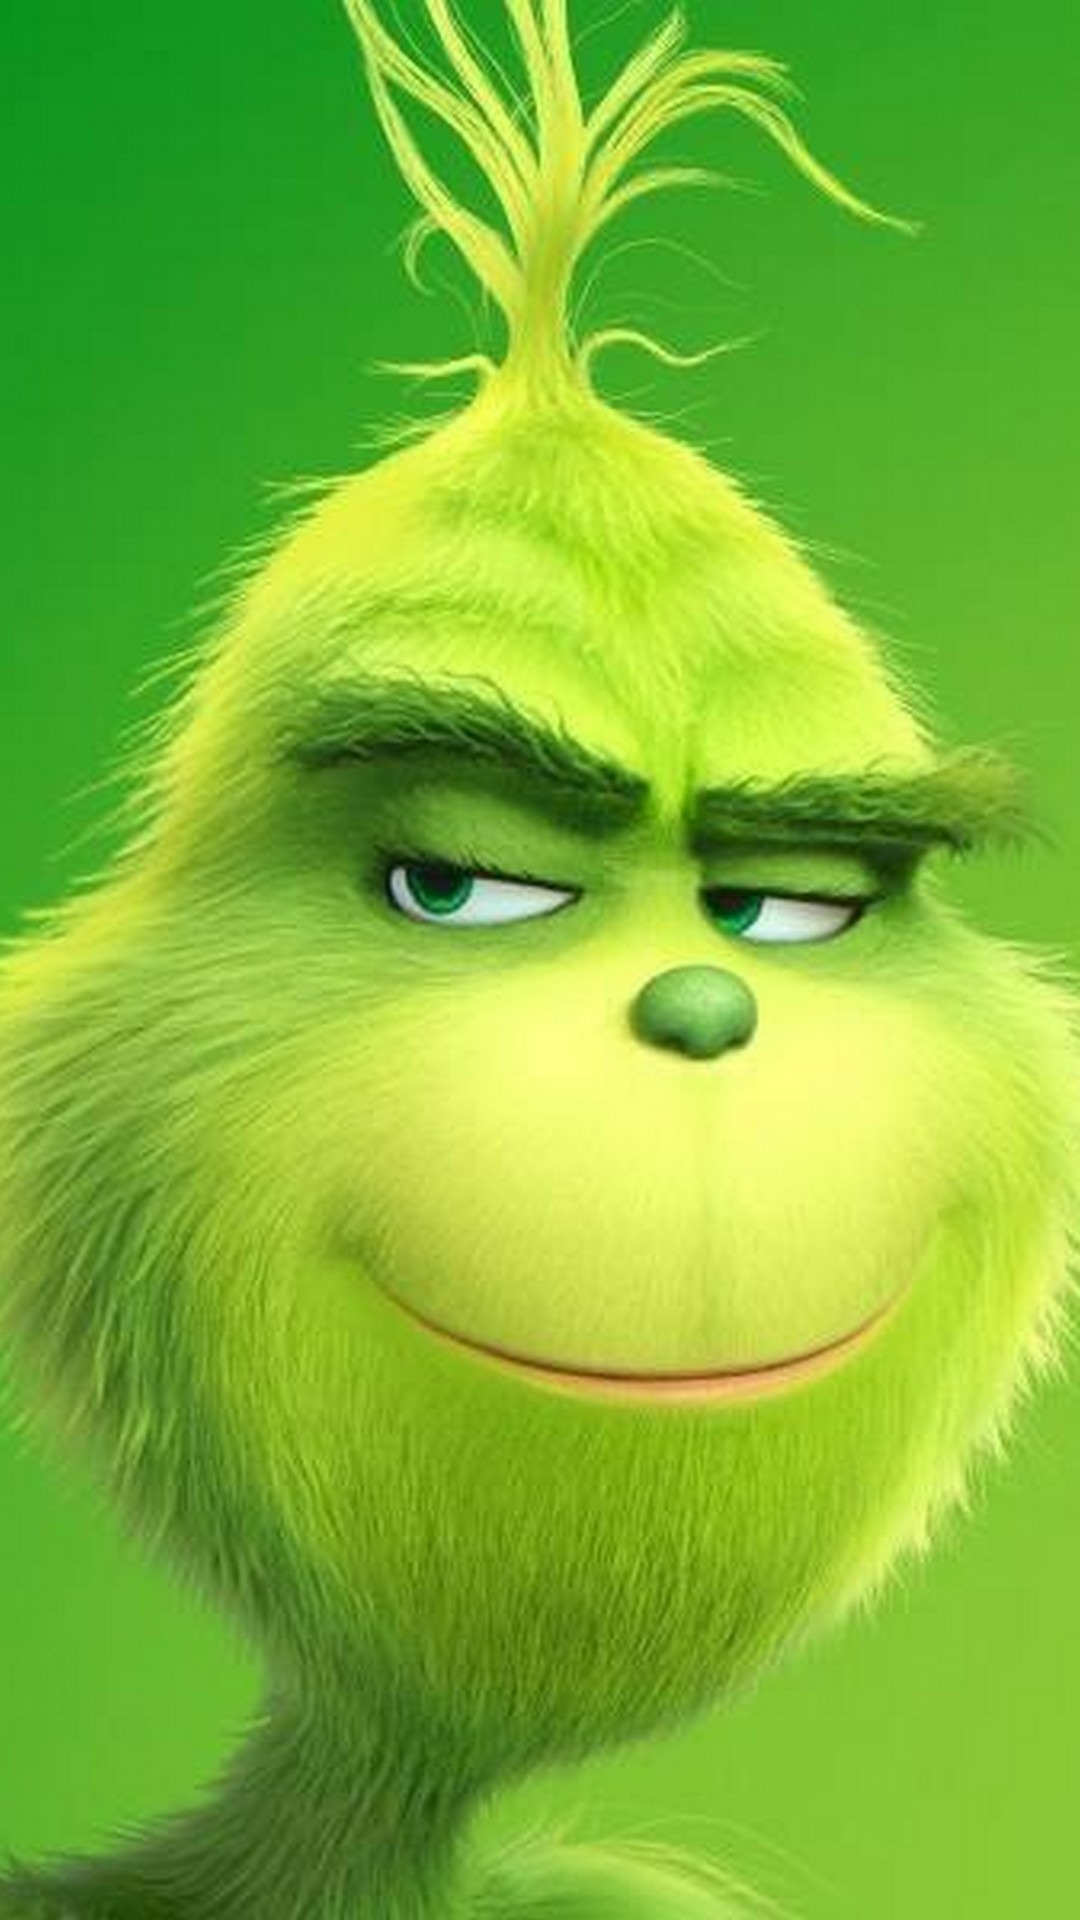 The Grinch 2018 Poster - 2022 Movie